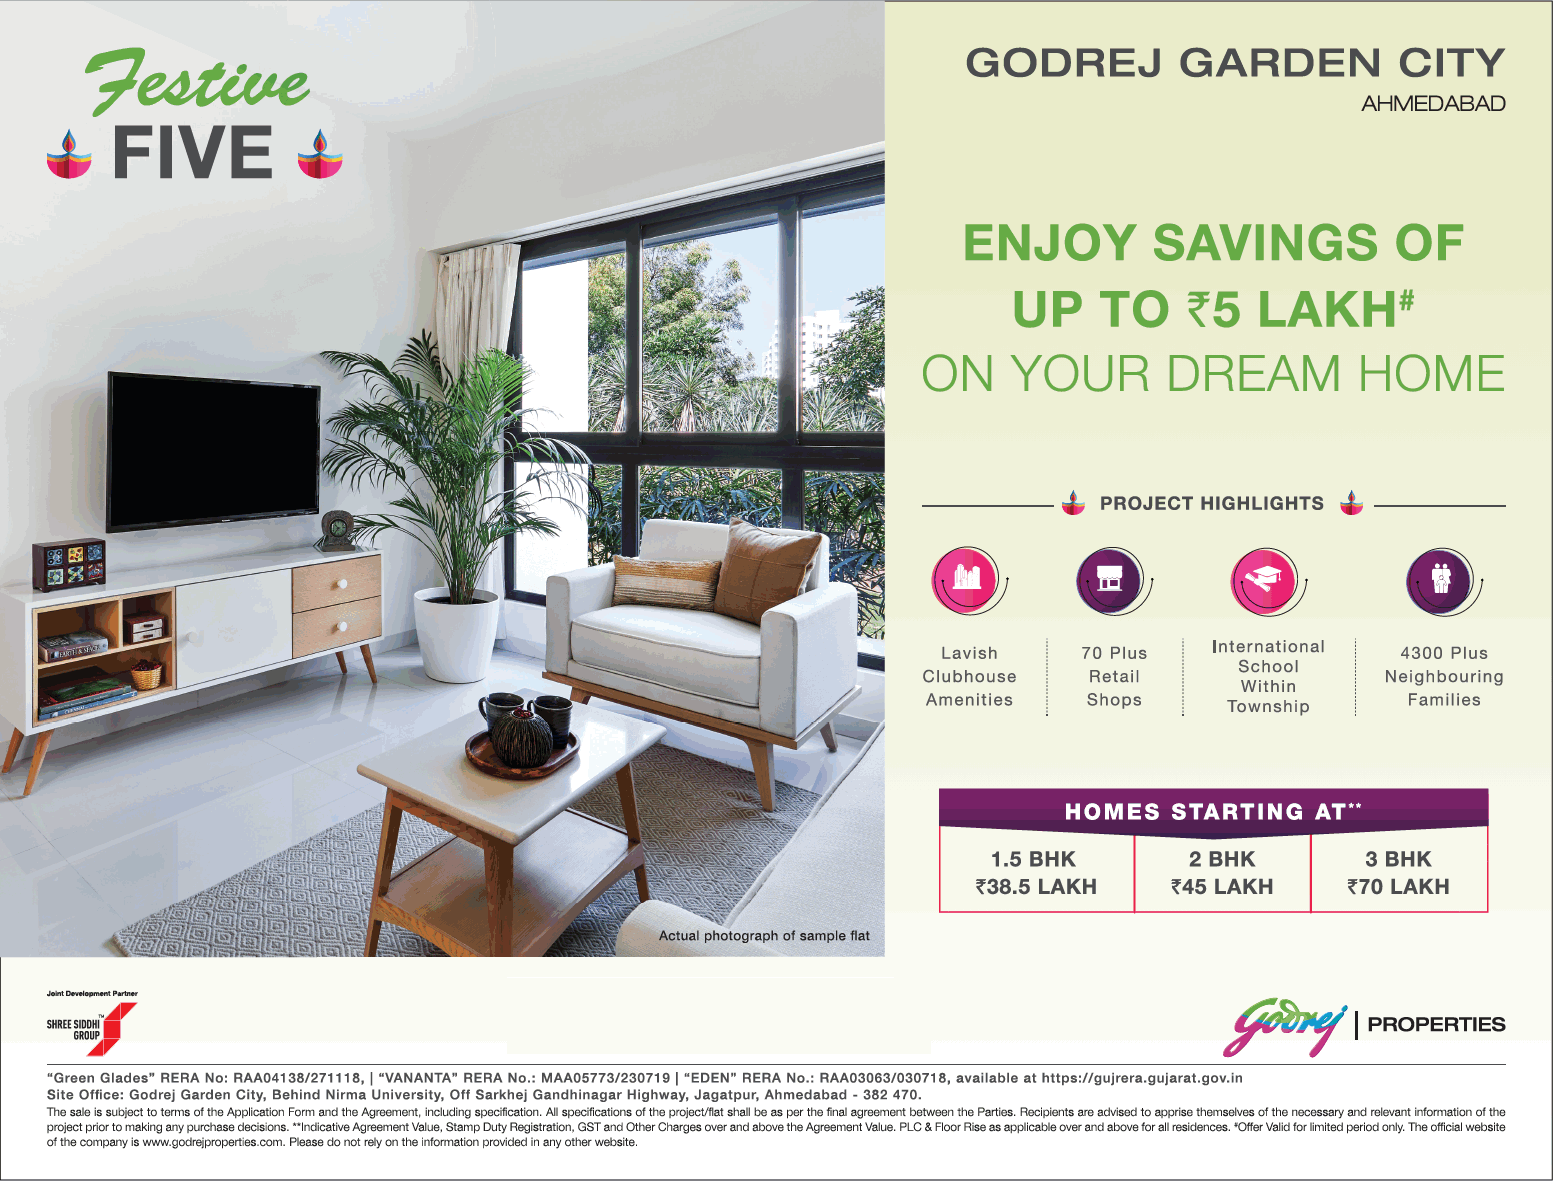 Enjoy savings of up to Rs 5 Lakh on your dream home at Godrej Garden City, Ahmedabad Update